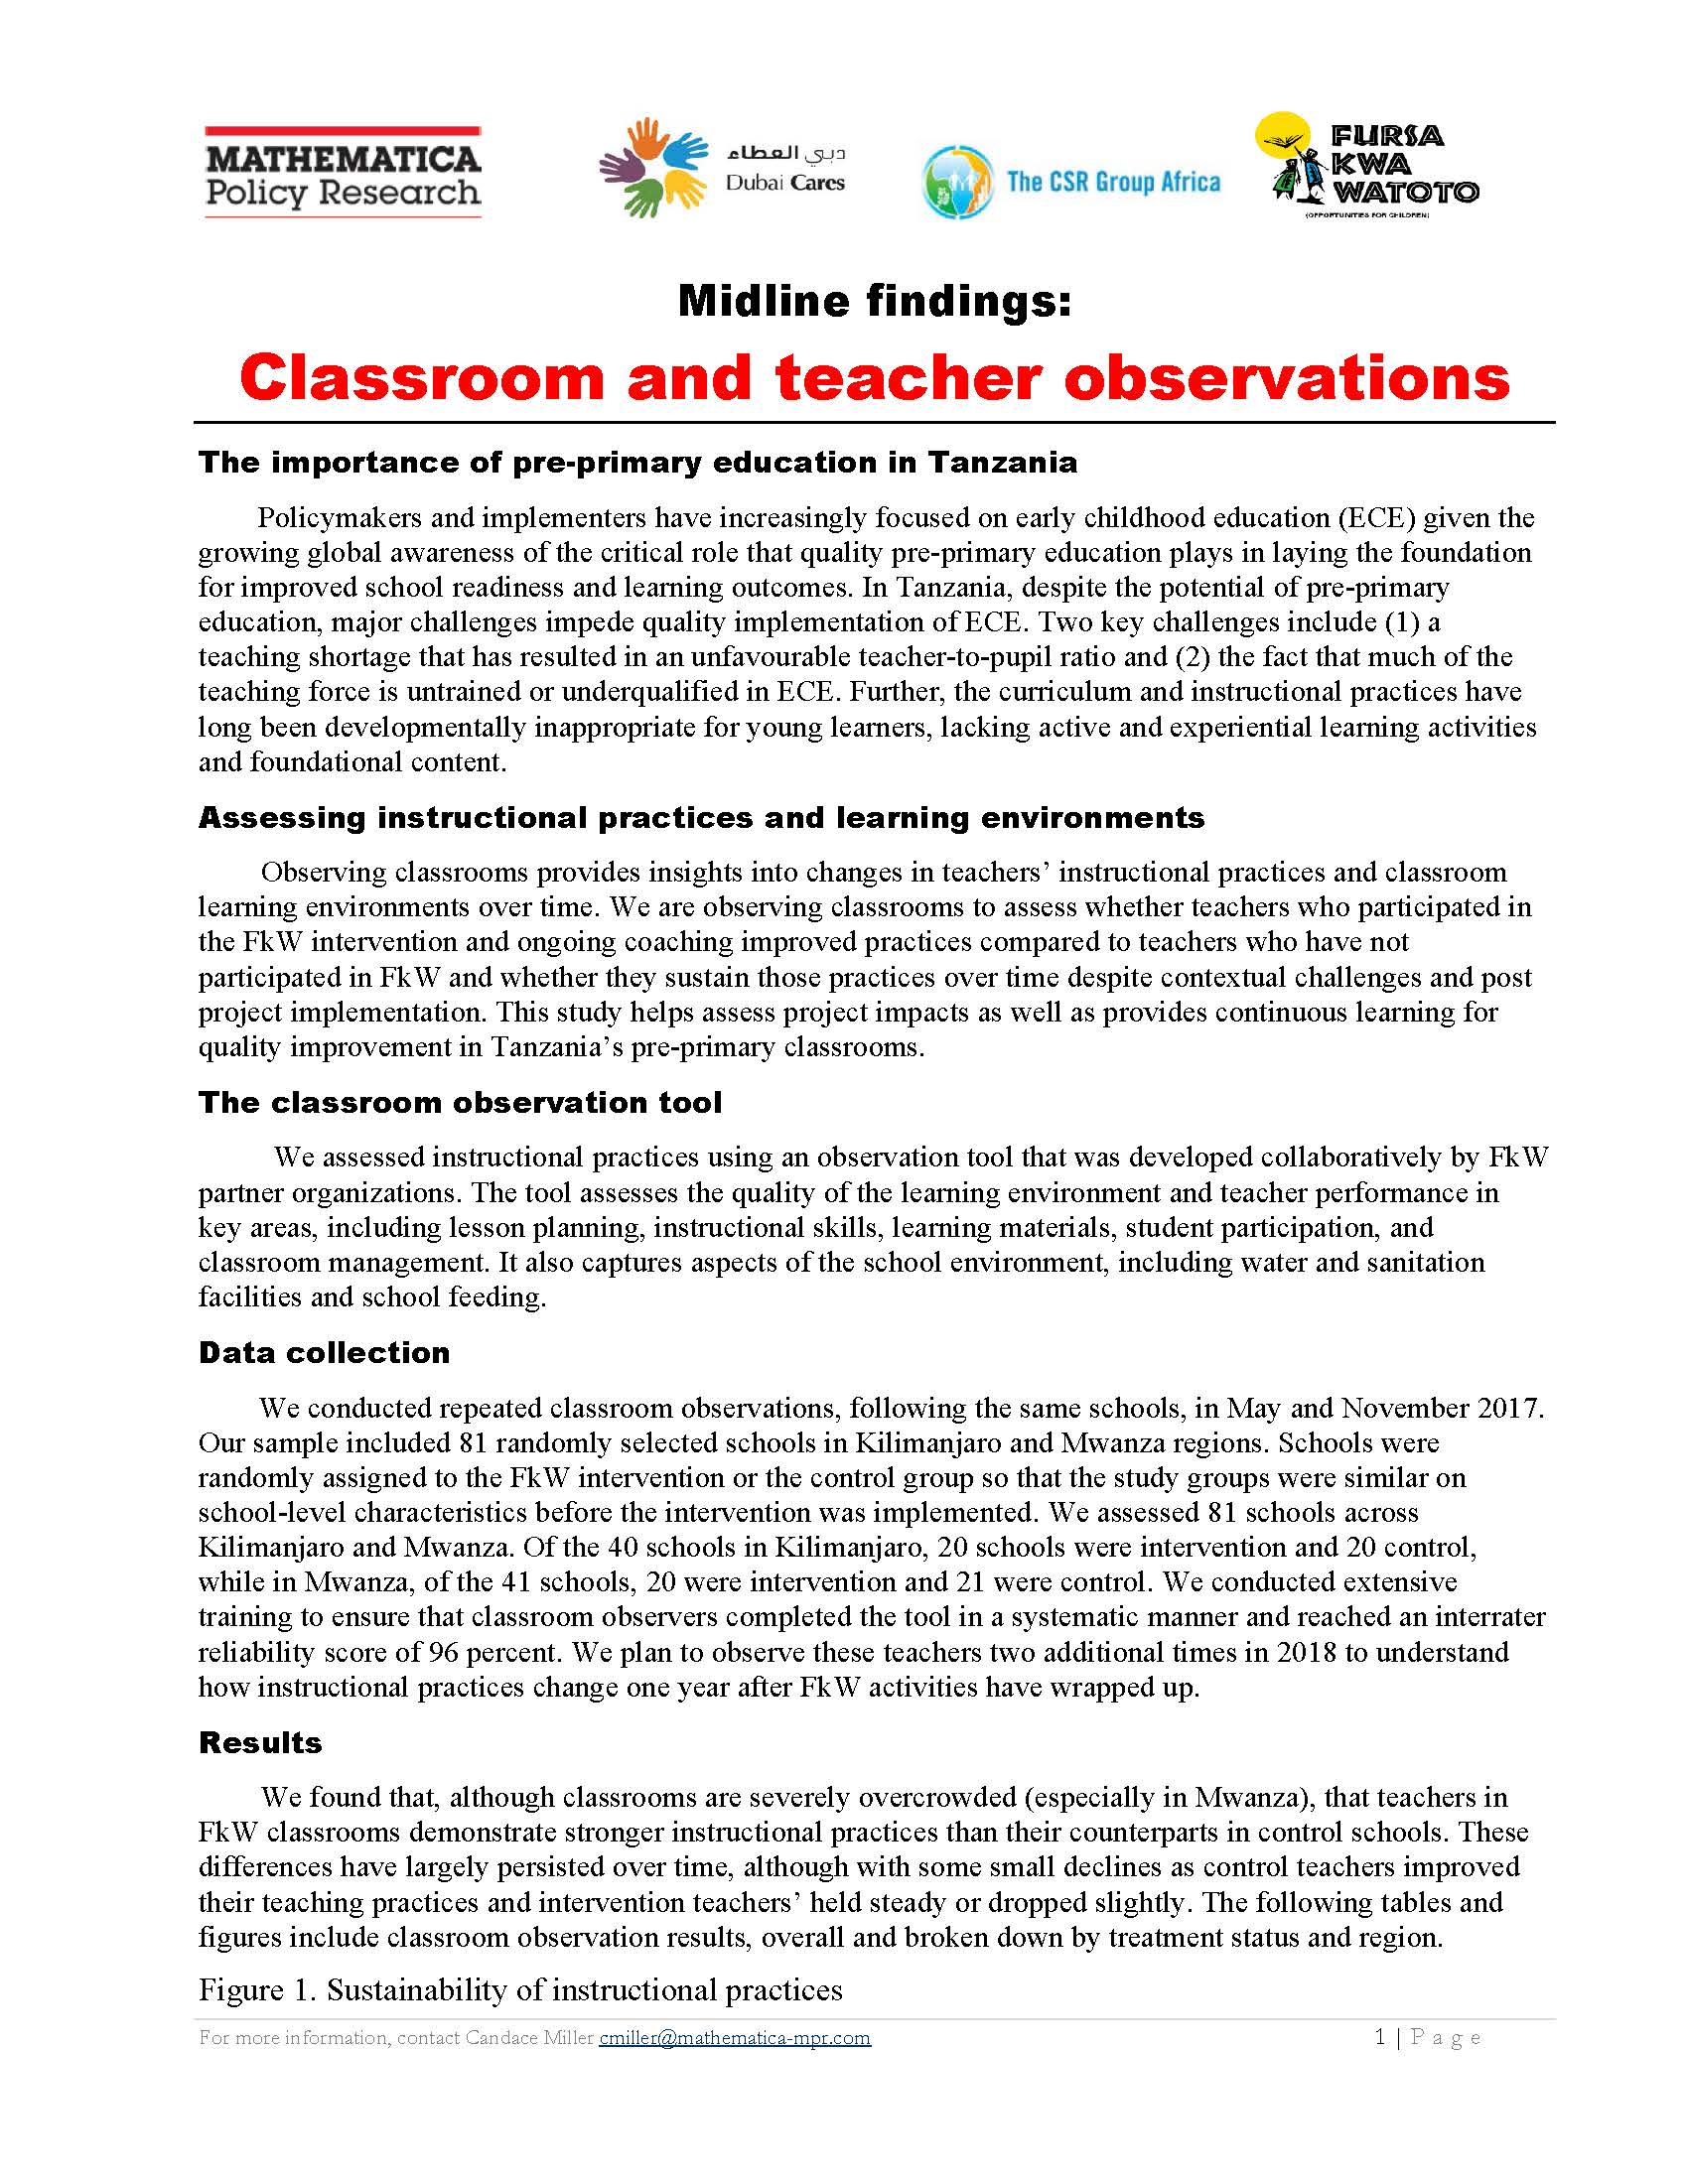 Classroom Observation Results Tables: Sustainability - Learning Agenda